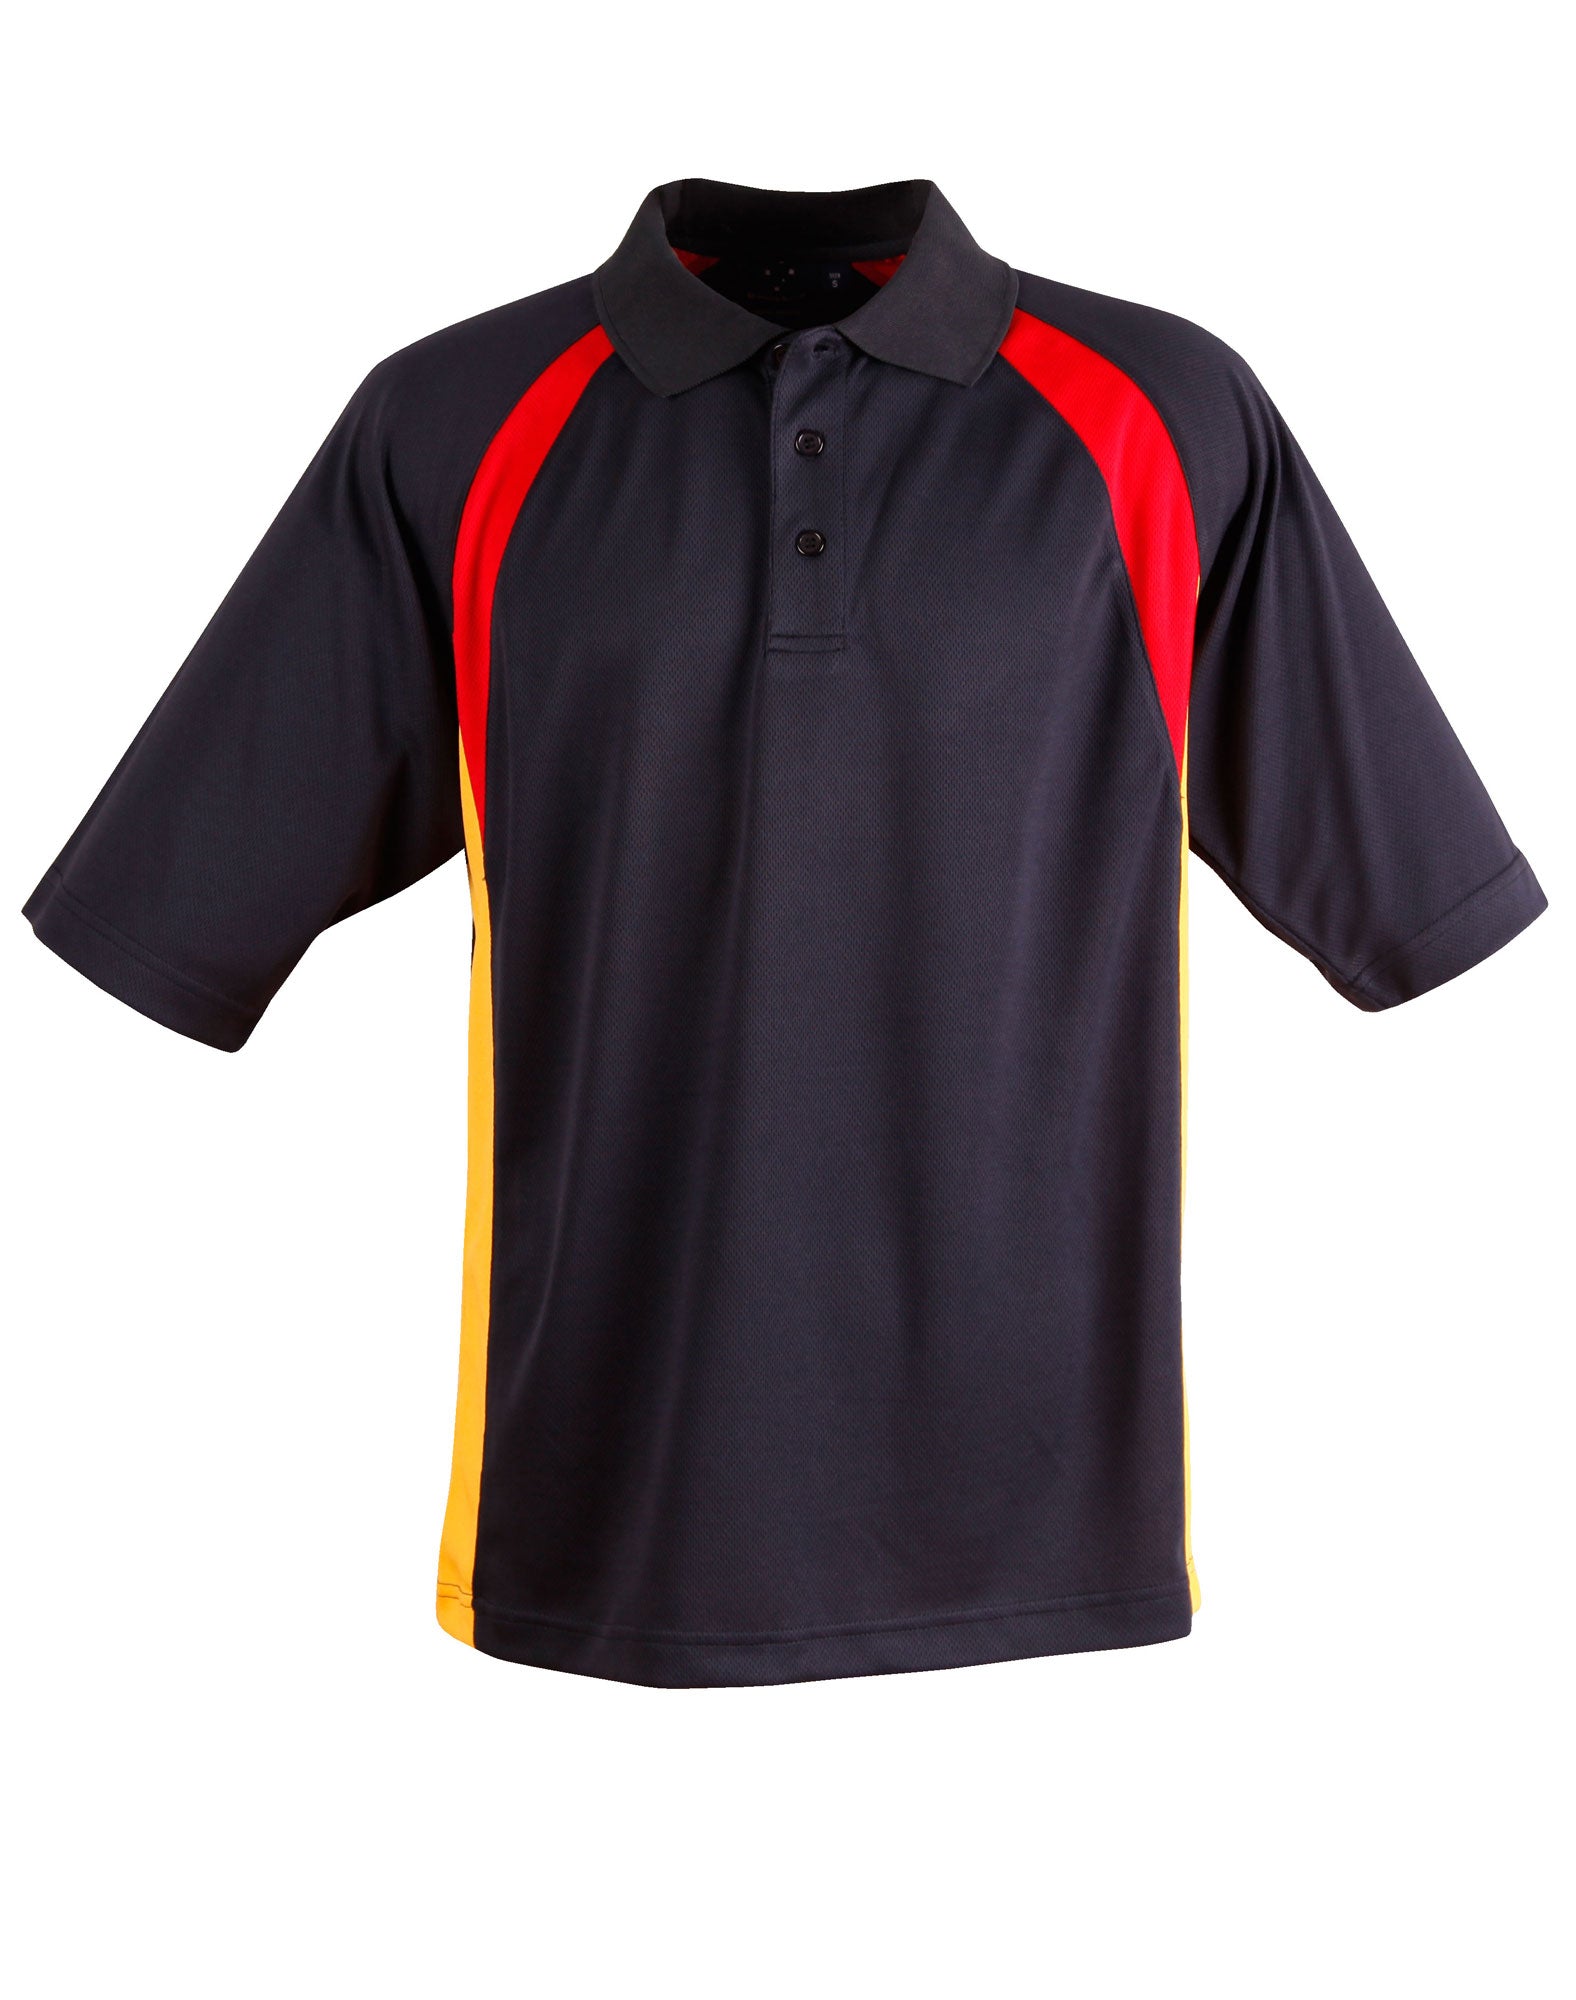 Cooldry Tricolour Polo Shirt - made by AIW